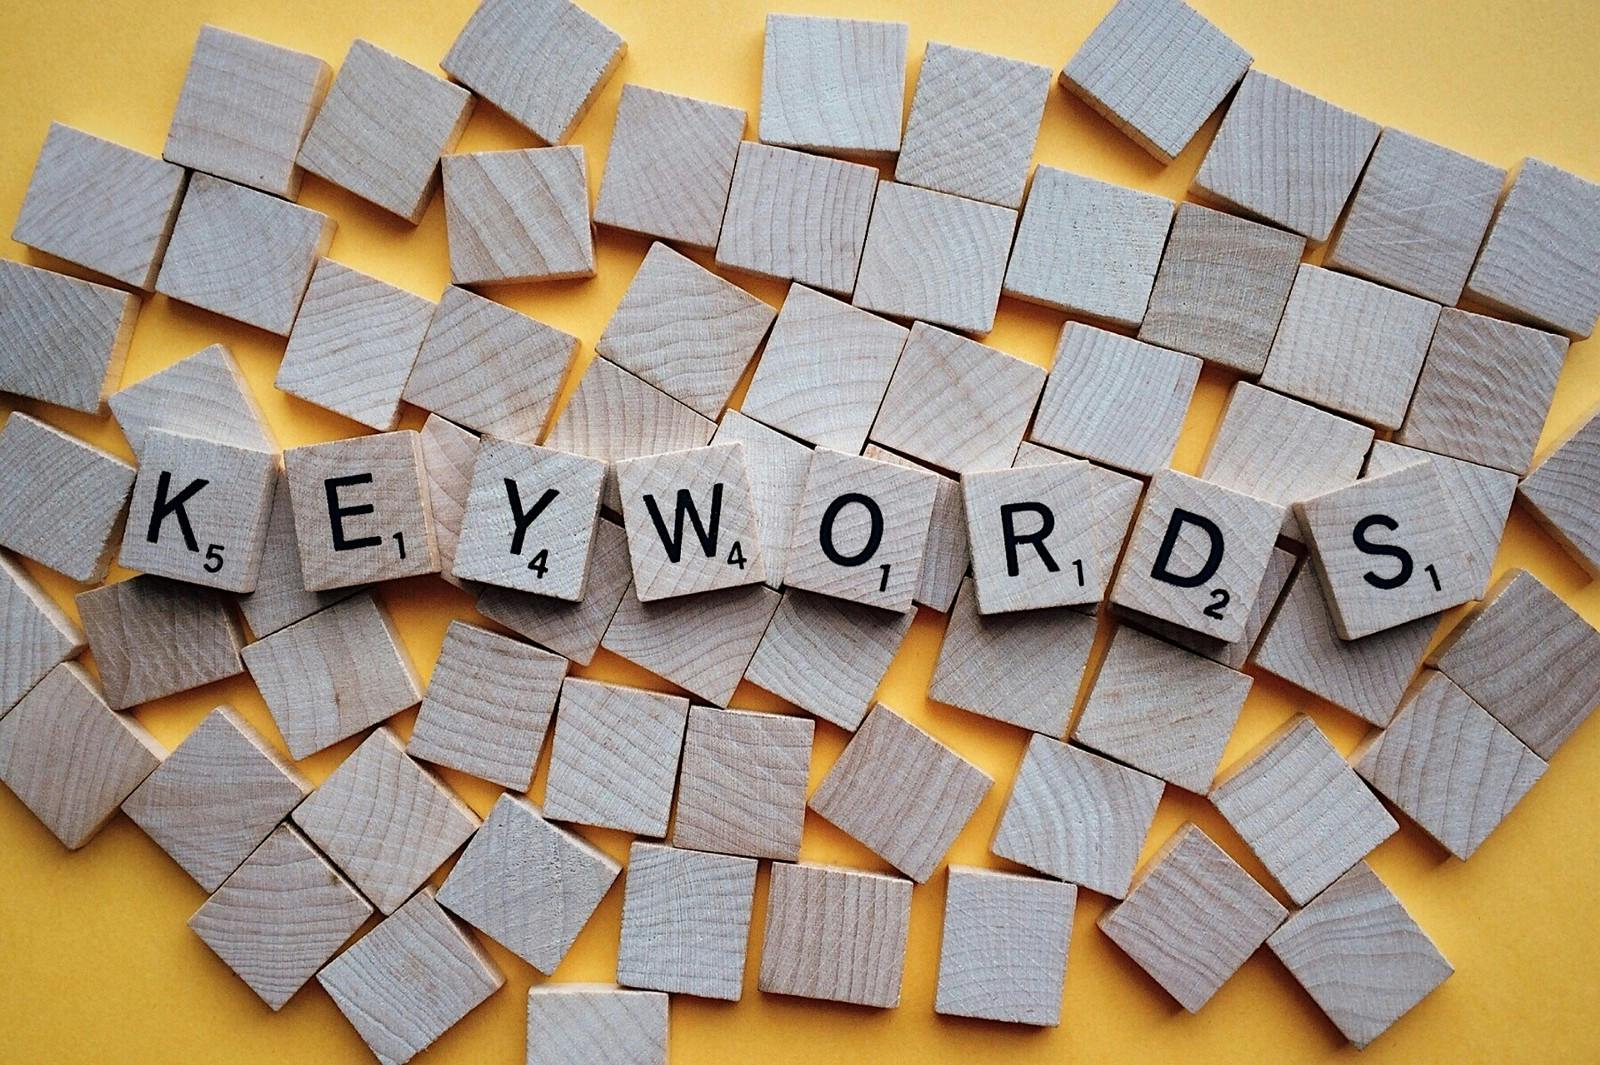 /how-to-conduct-effective-keyword-research-57163ab4178c feature image